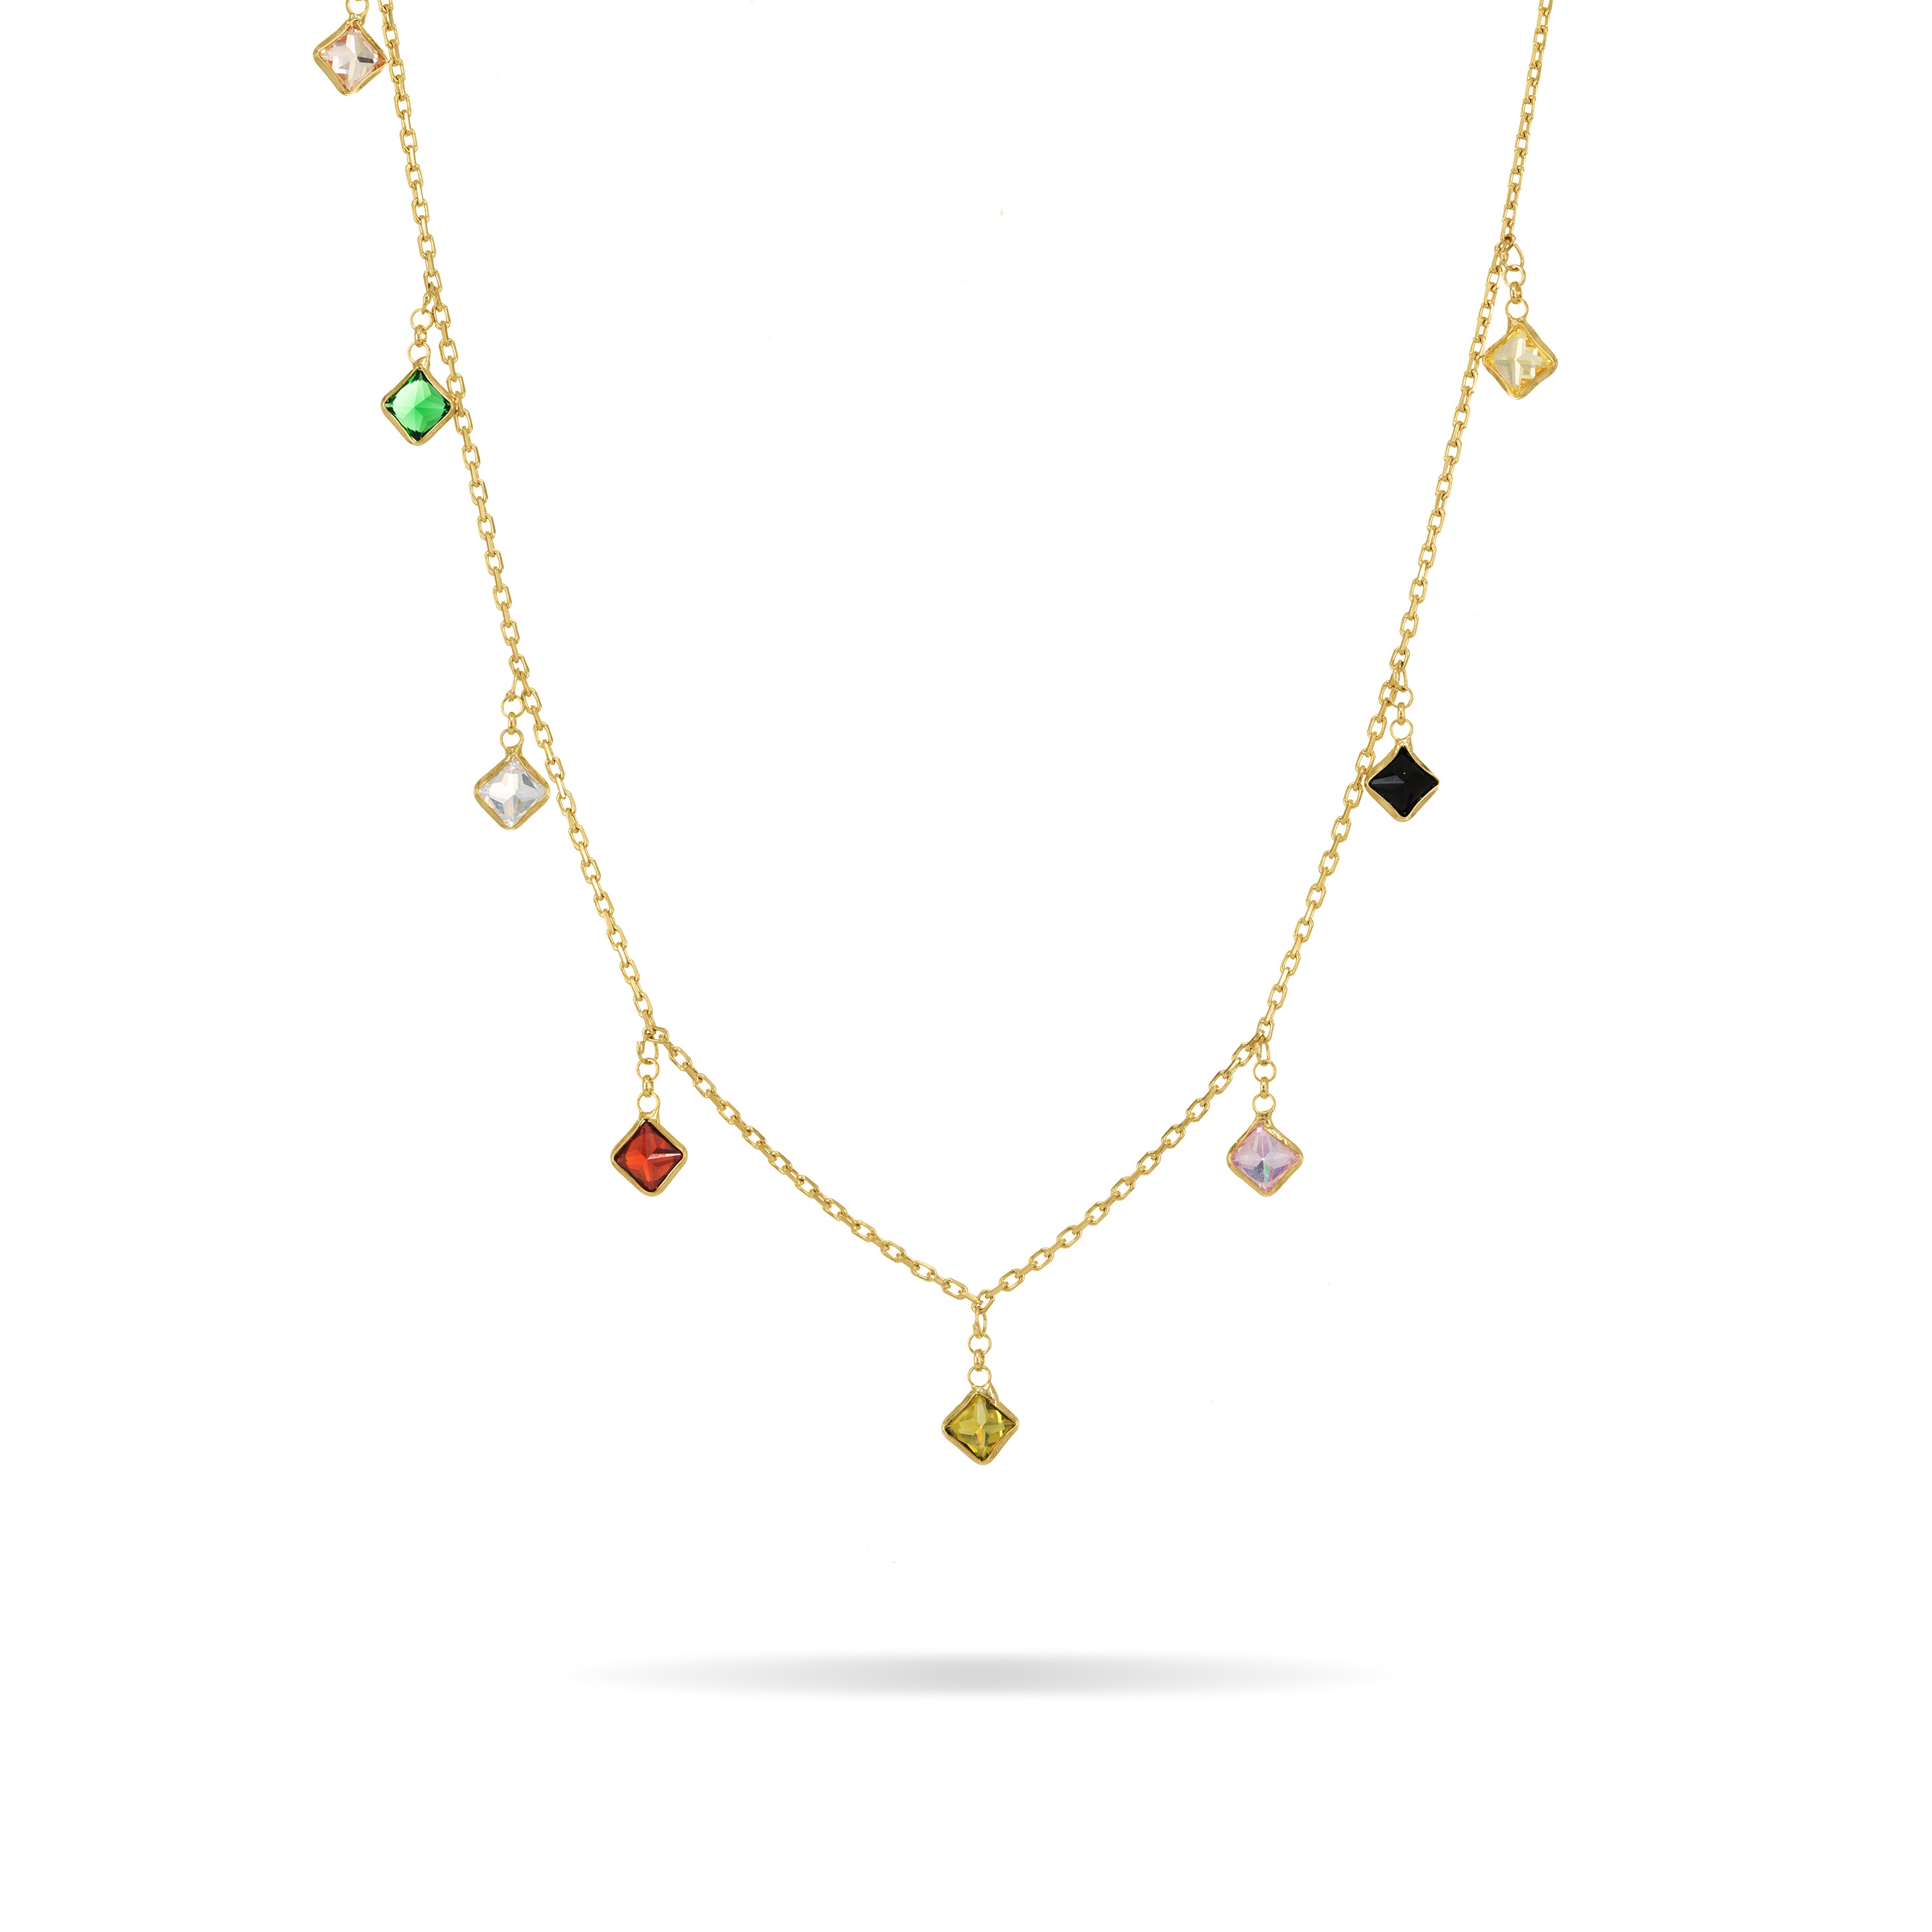 Square Droplets Chain Necklace